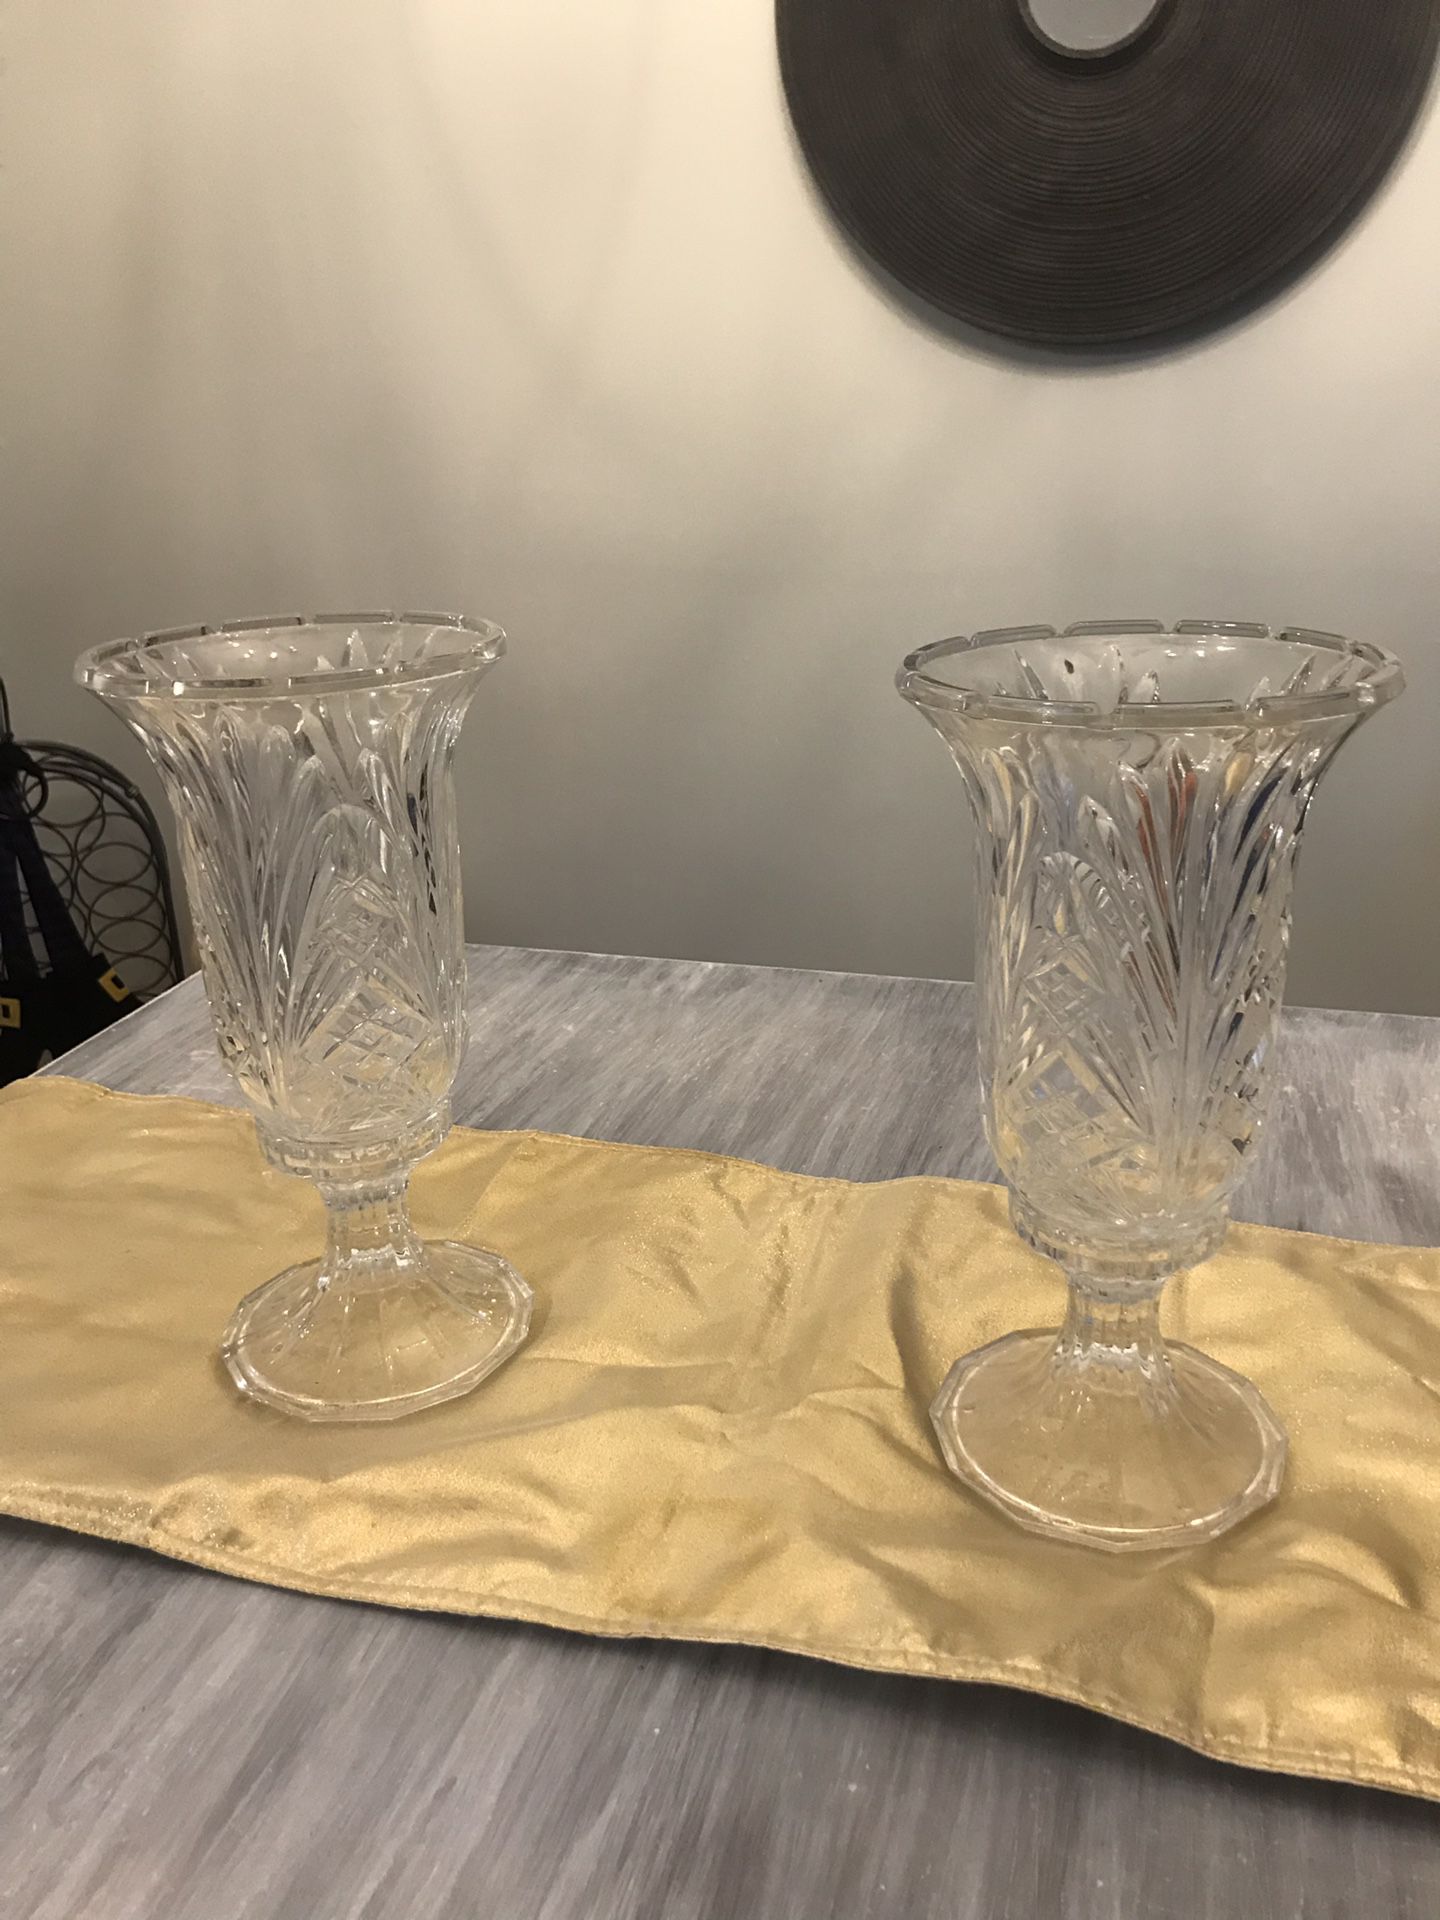 Crystal candle stick holders